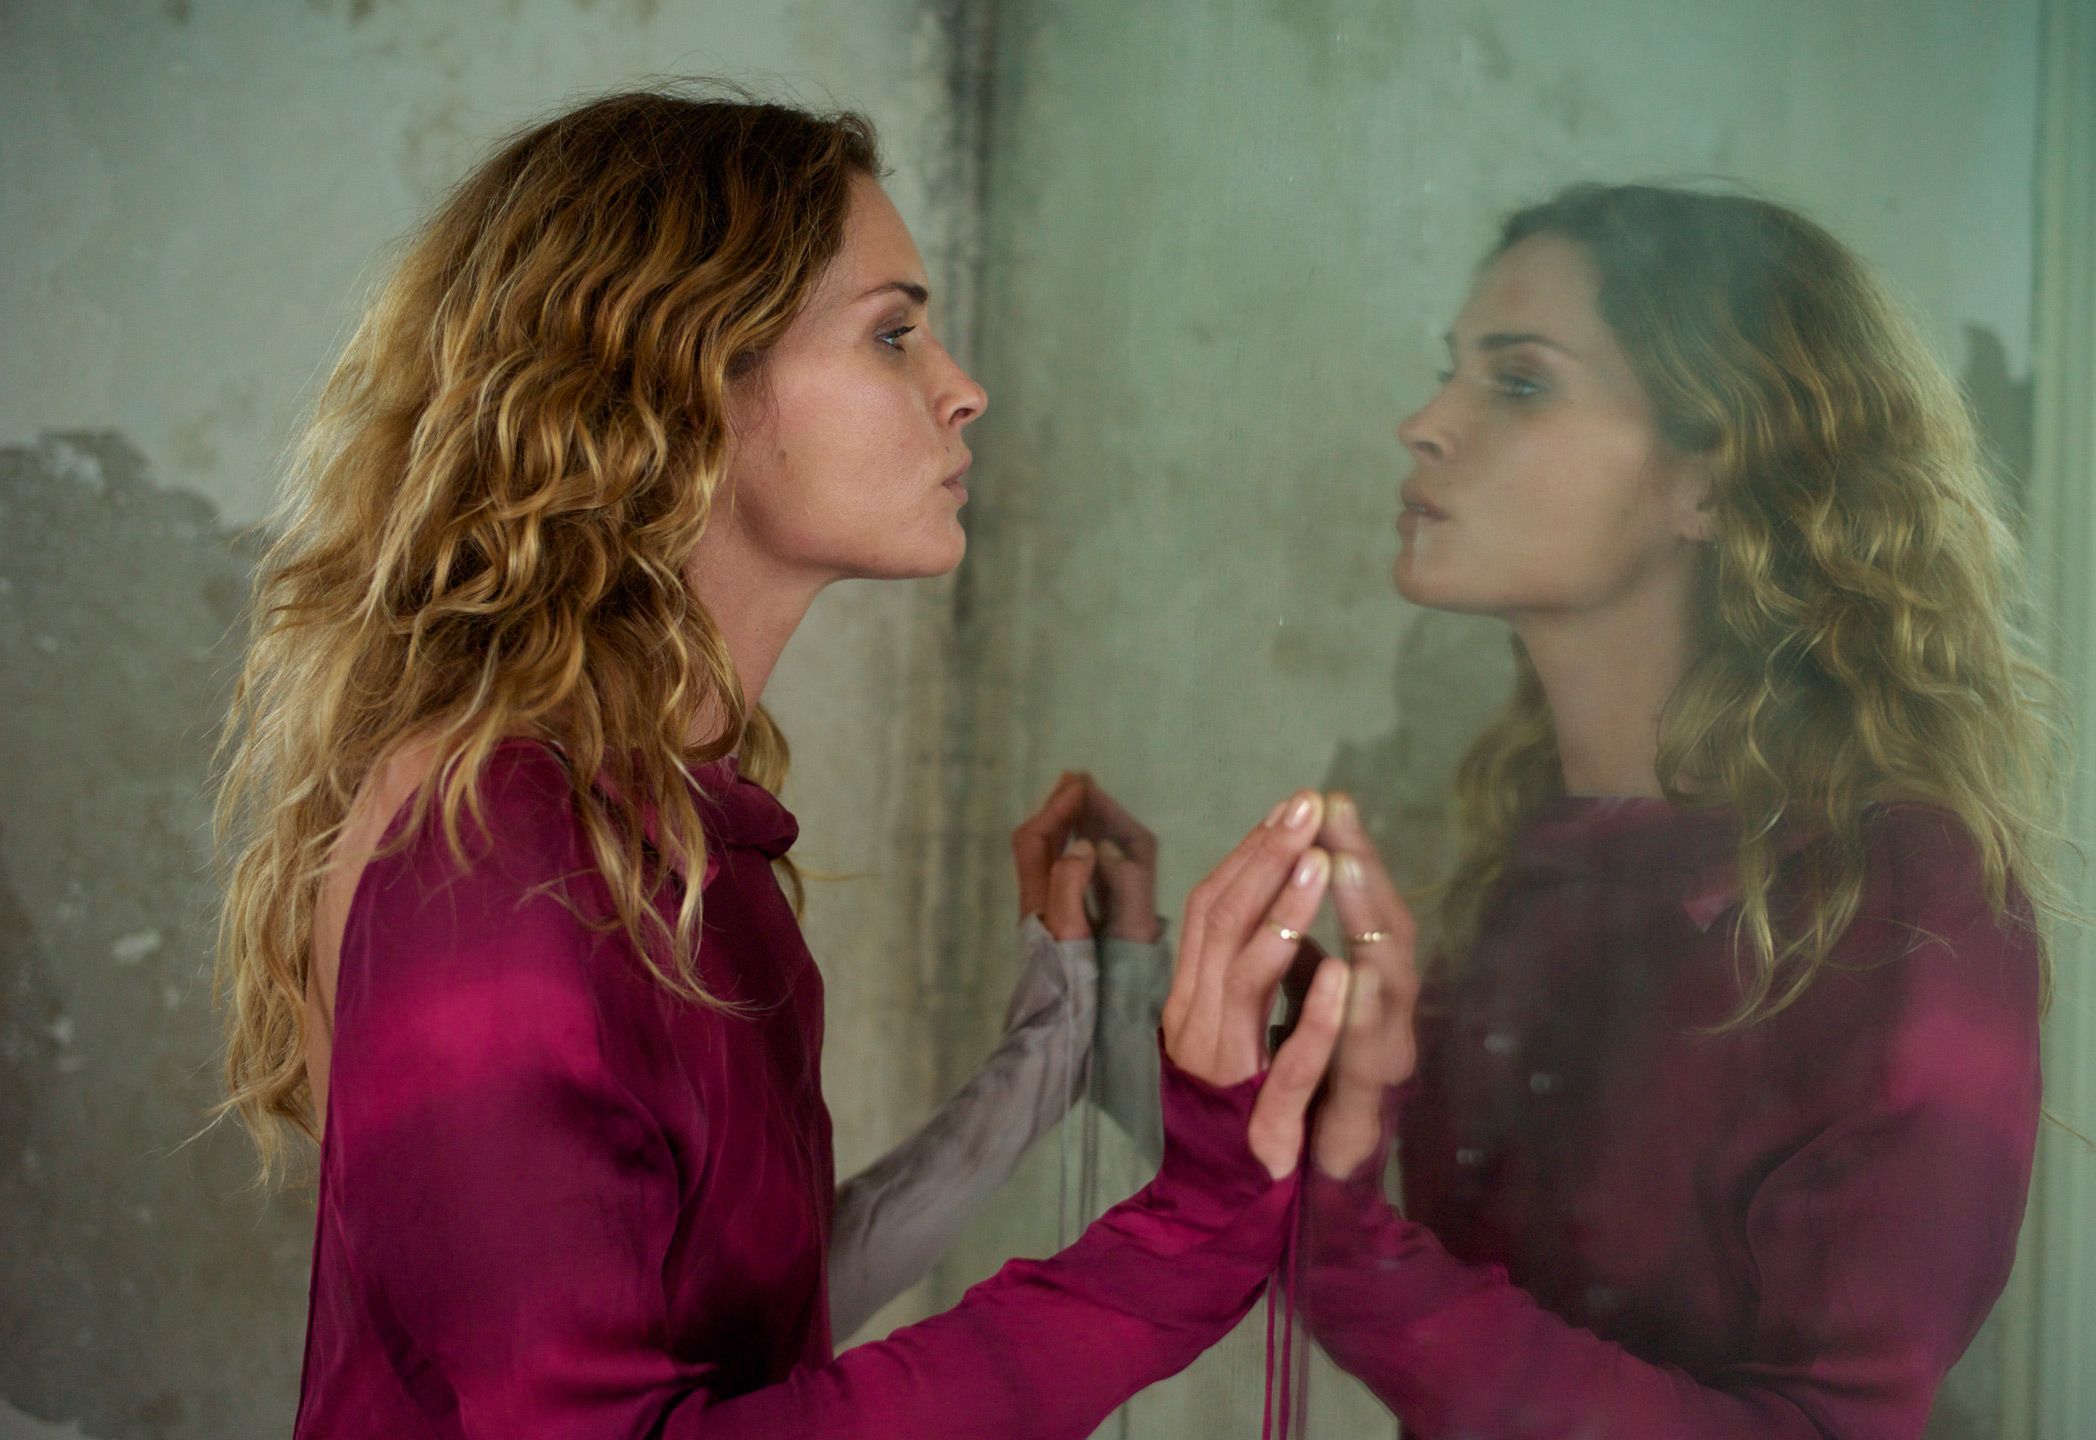 Erin Wasson looking into a mirror with her hands placed on it, wearing a raspberry pink long-sleeved top